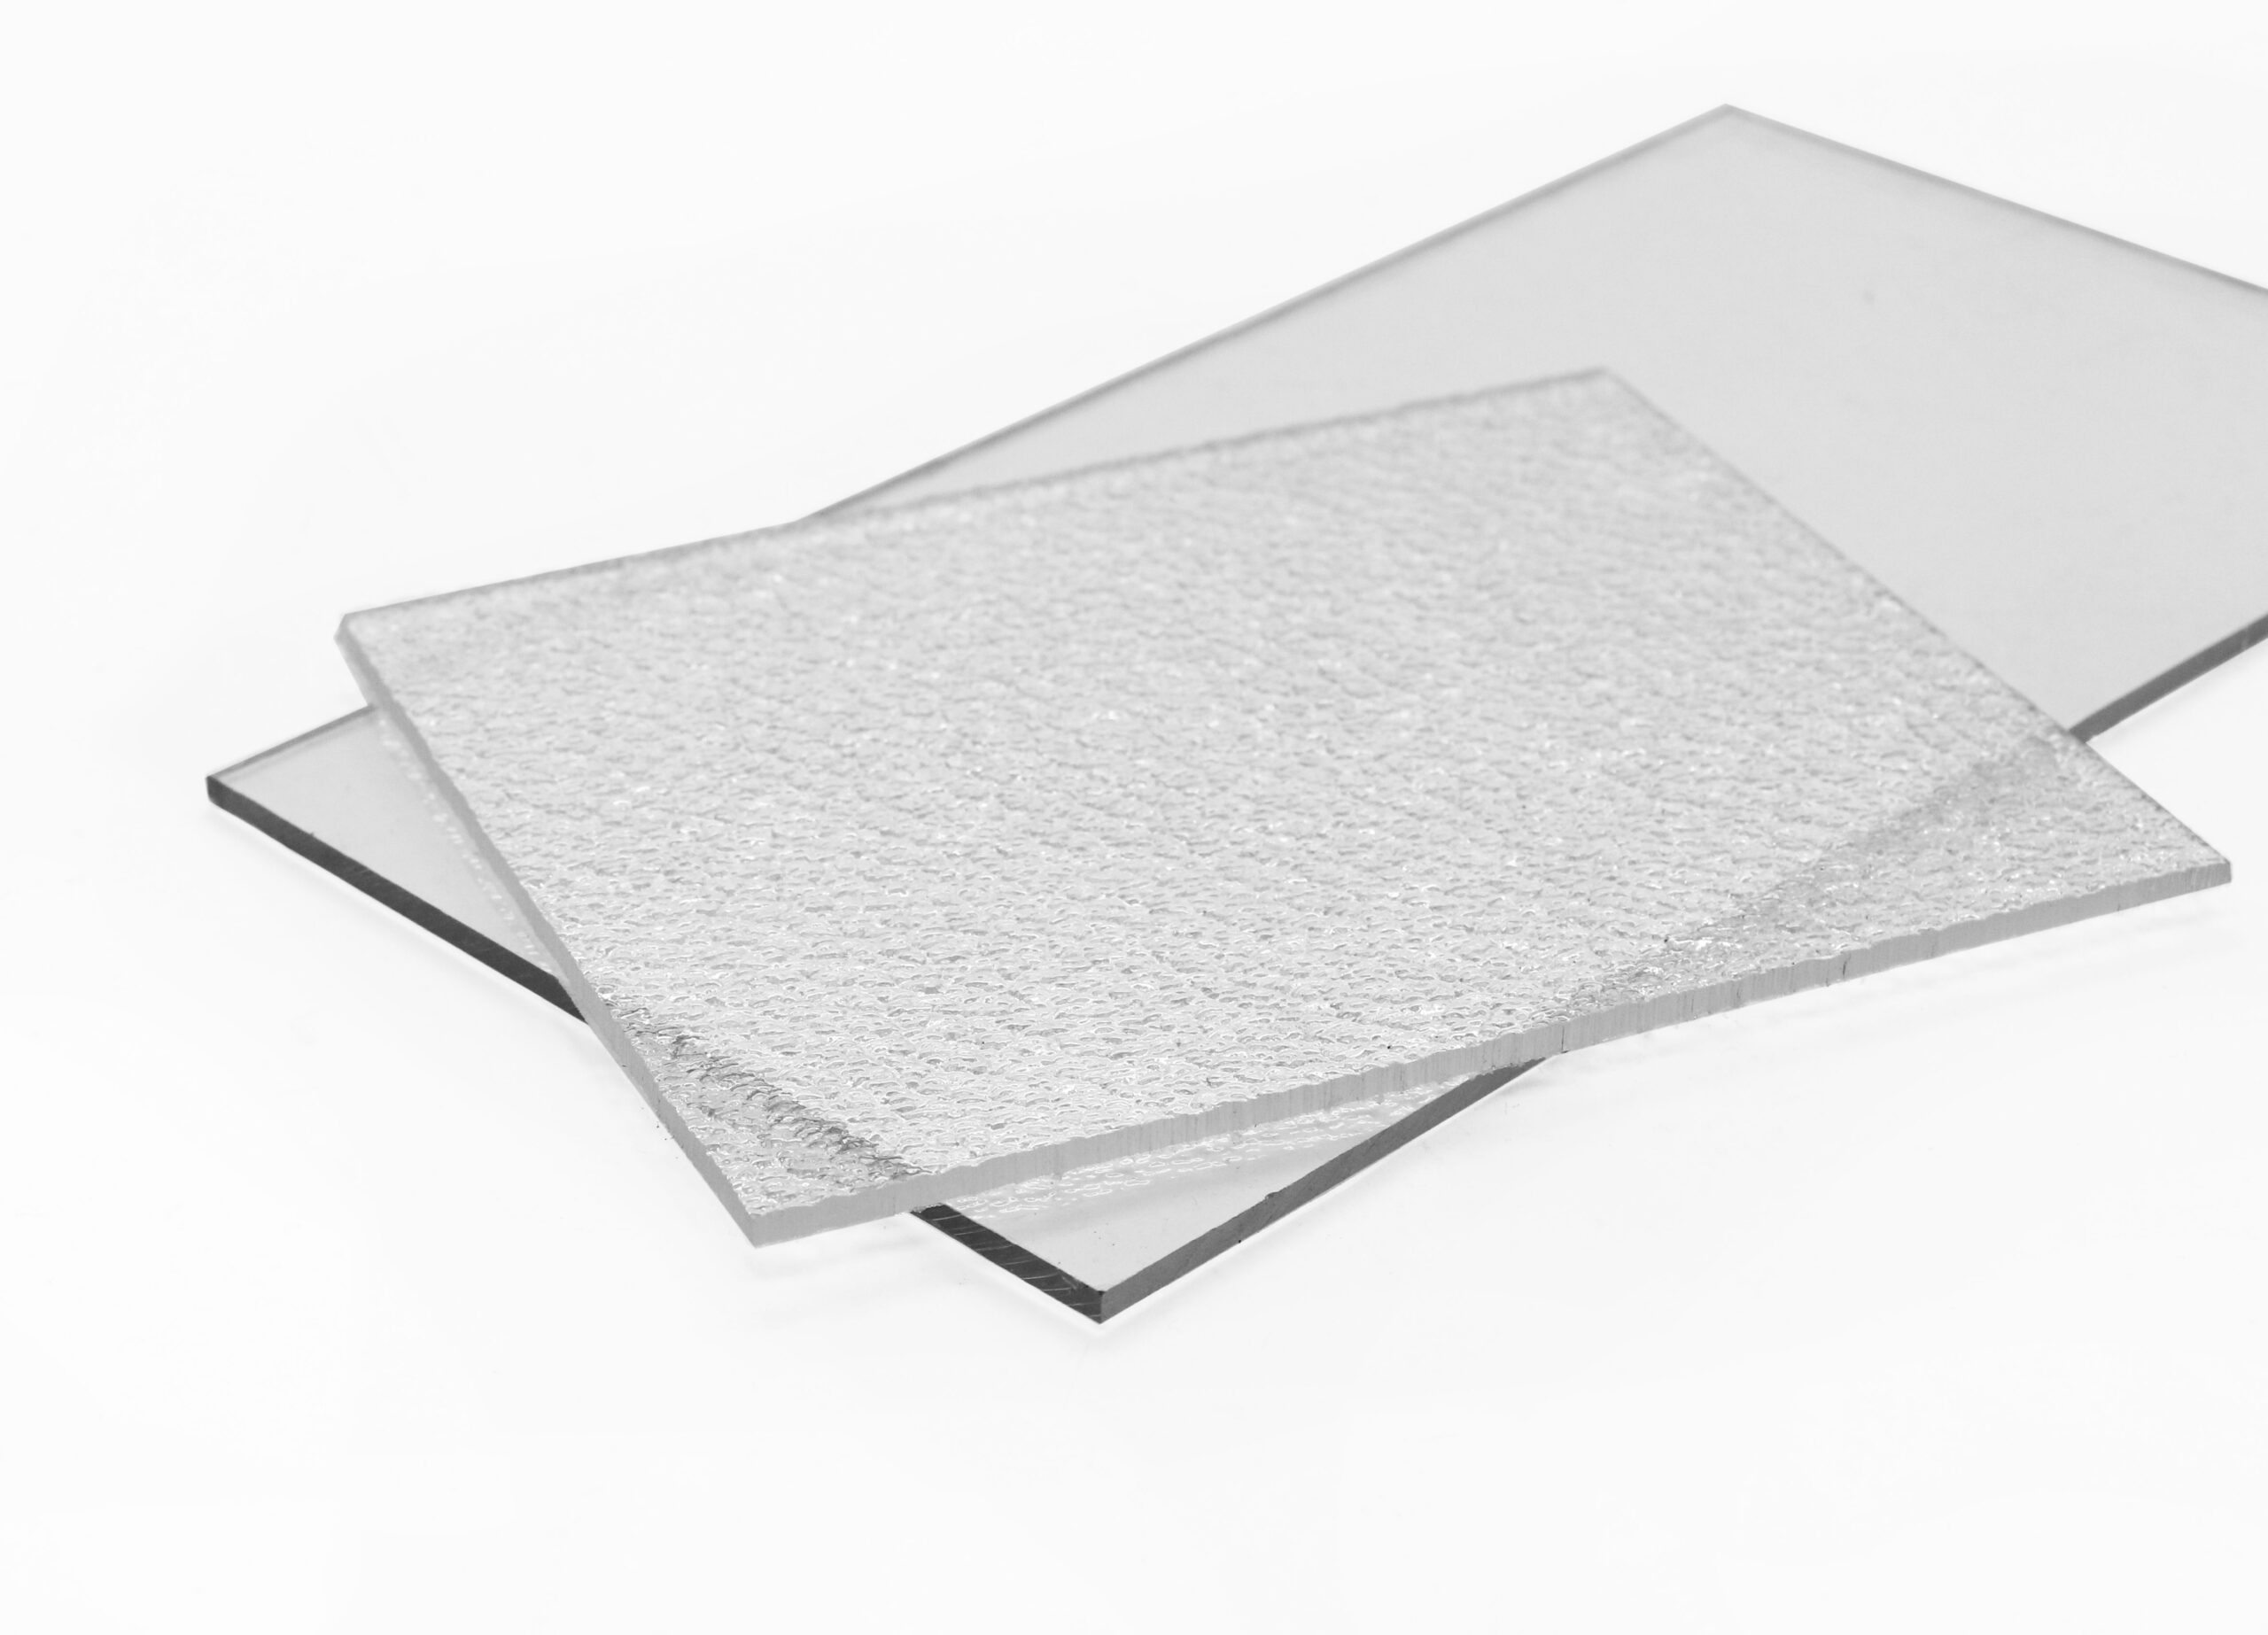 Clear Polycarbonate Plastic Sheet ,1mm - 10mm Thick Protected High Impact